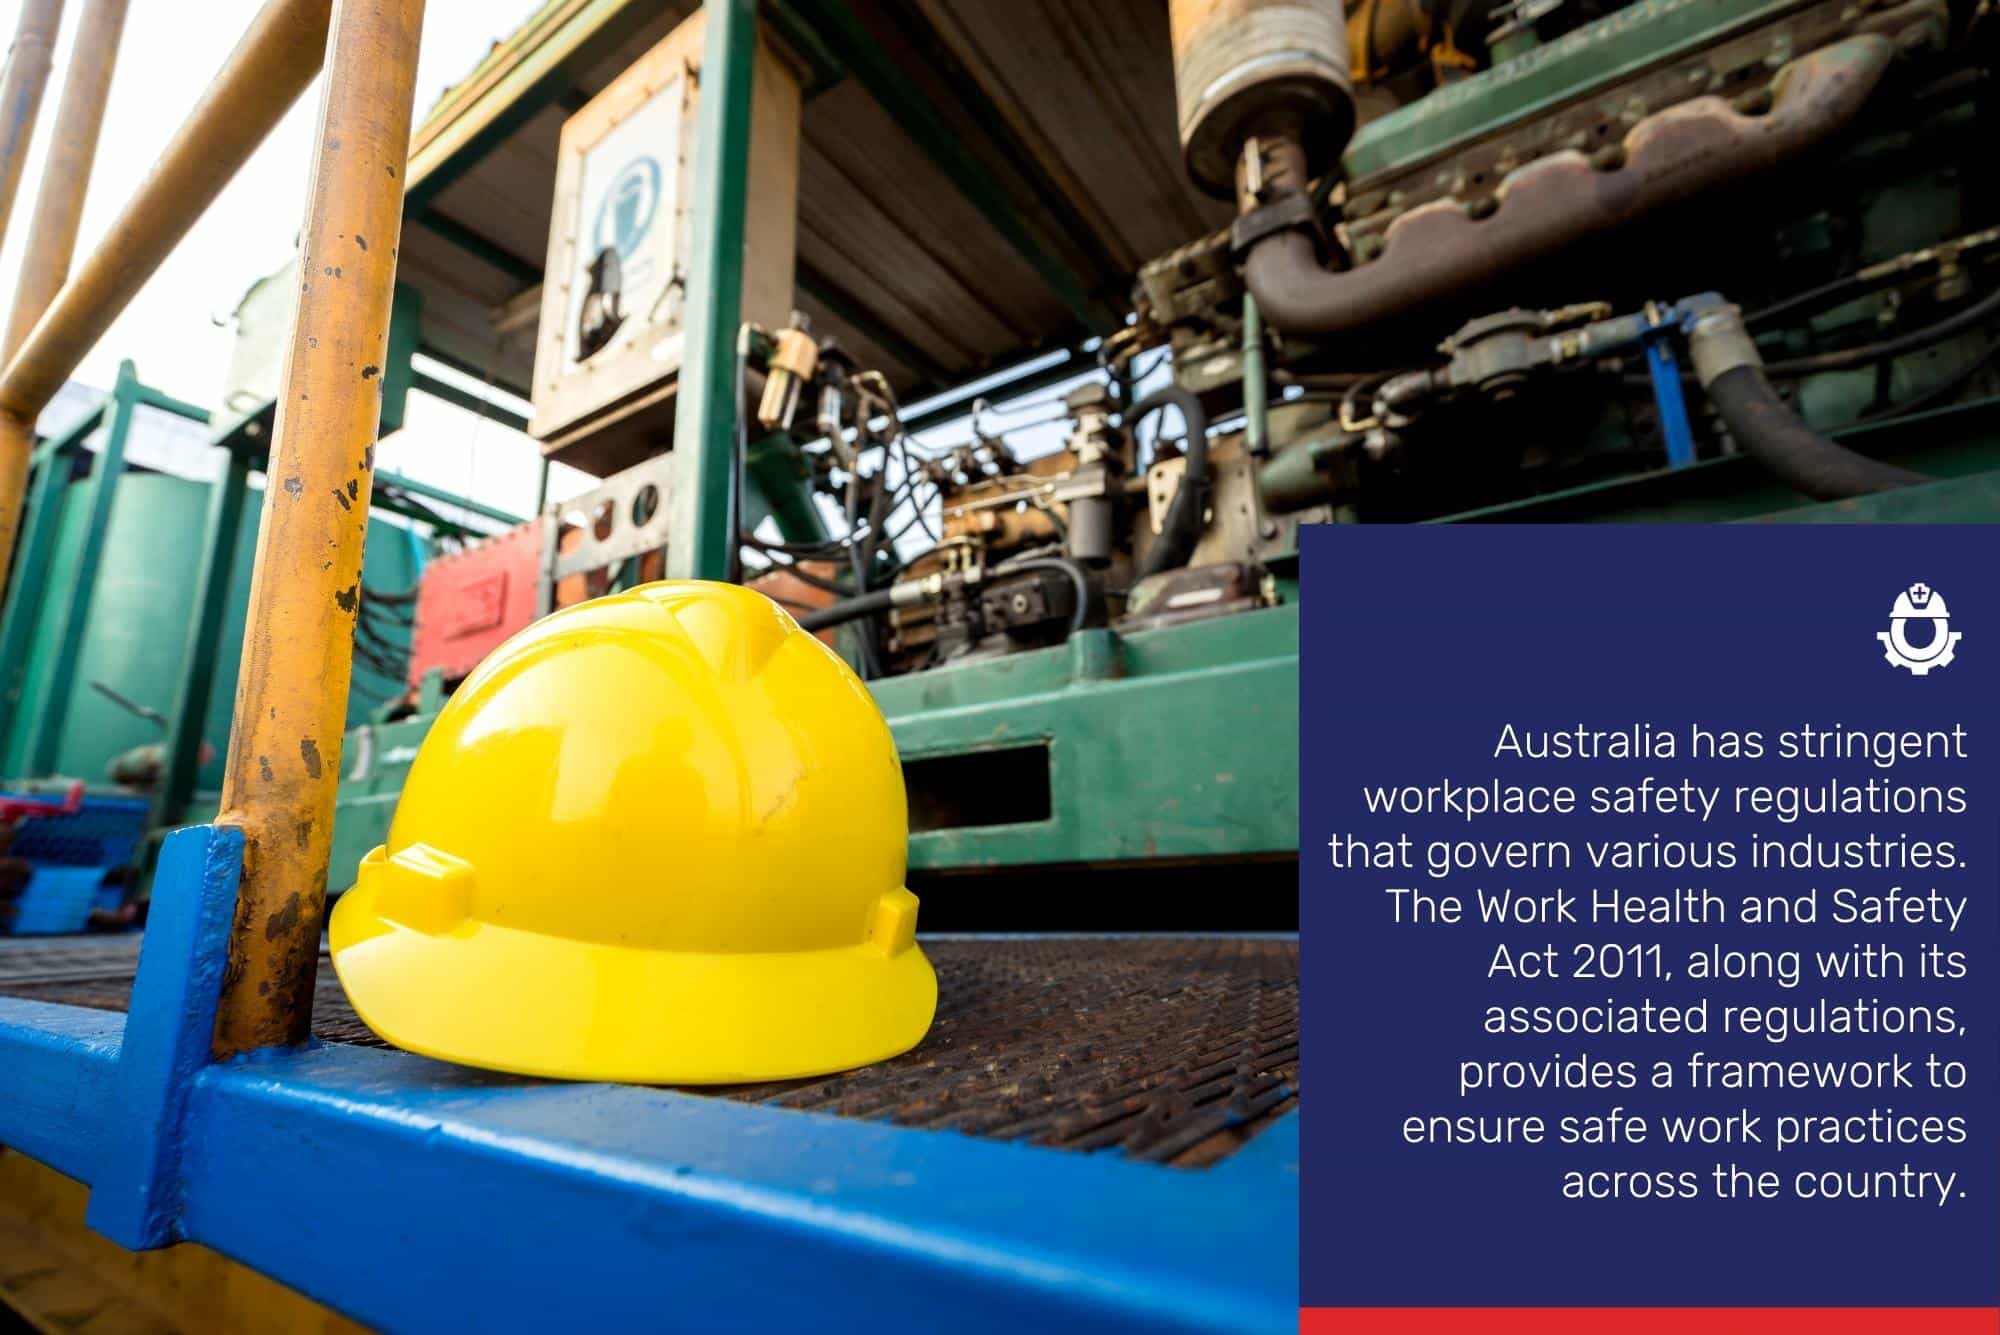 Workplace safety regulations in Australia